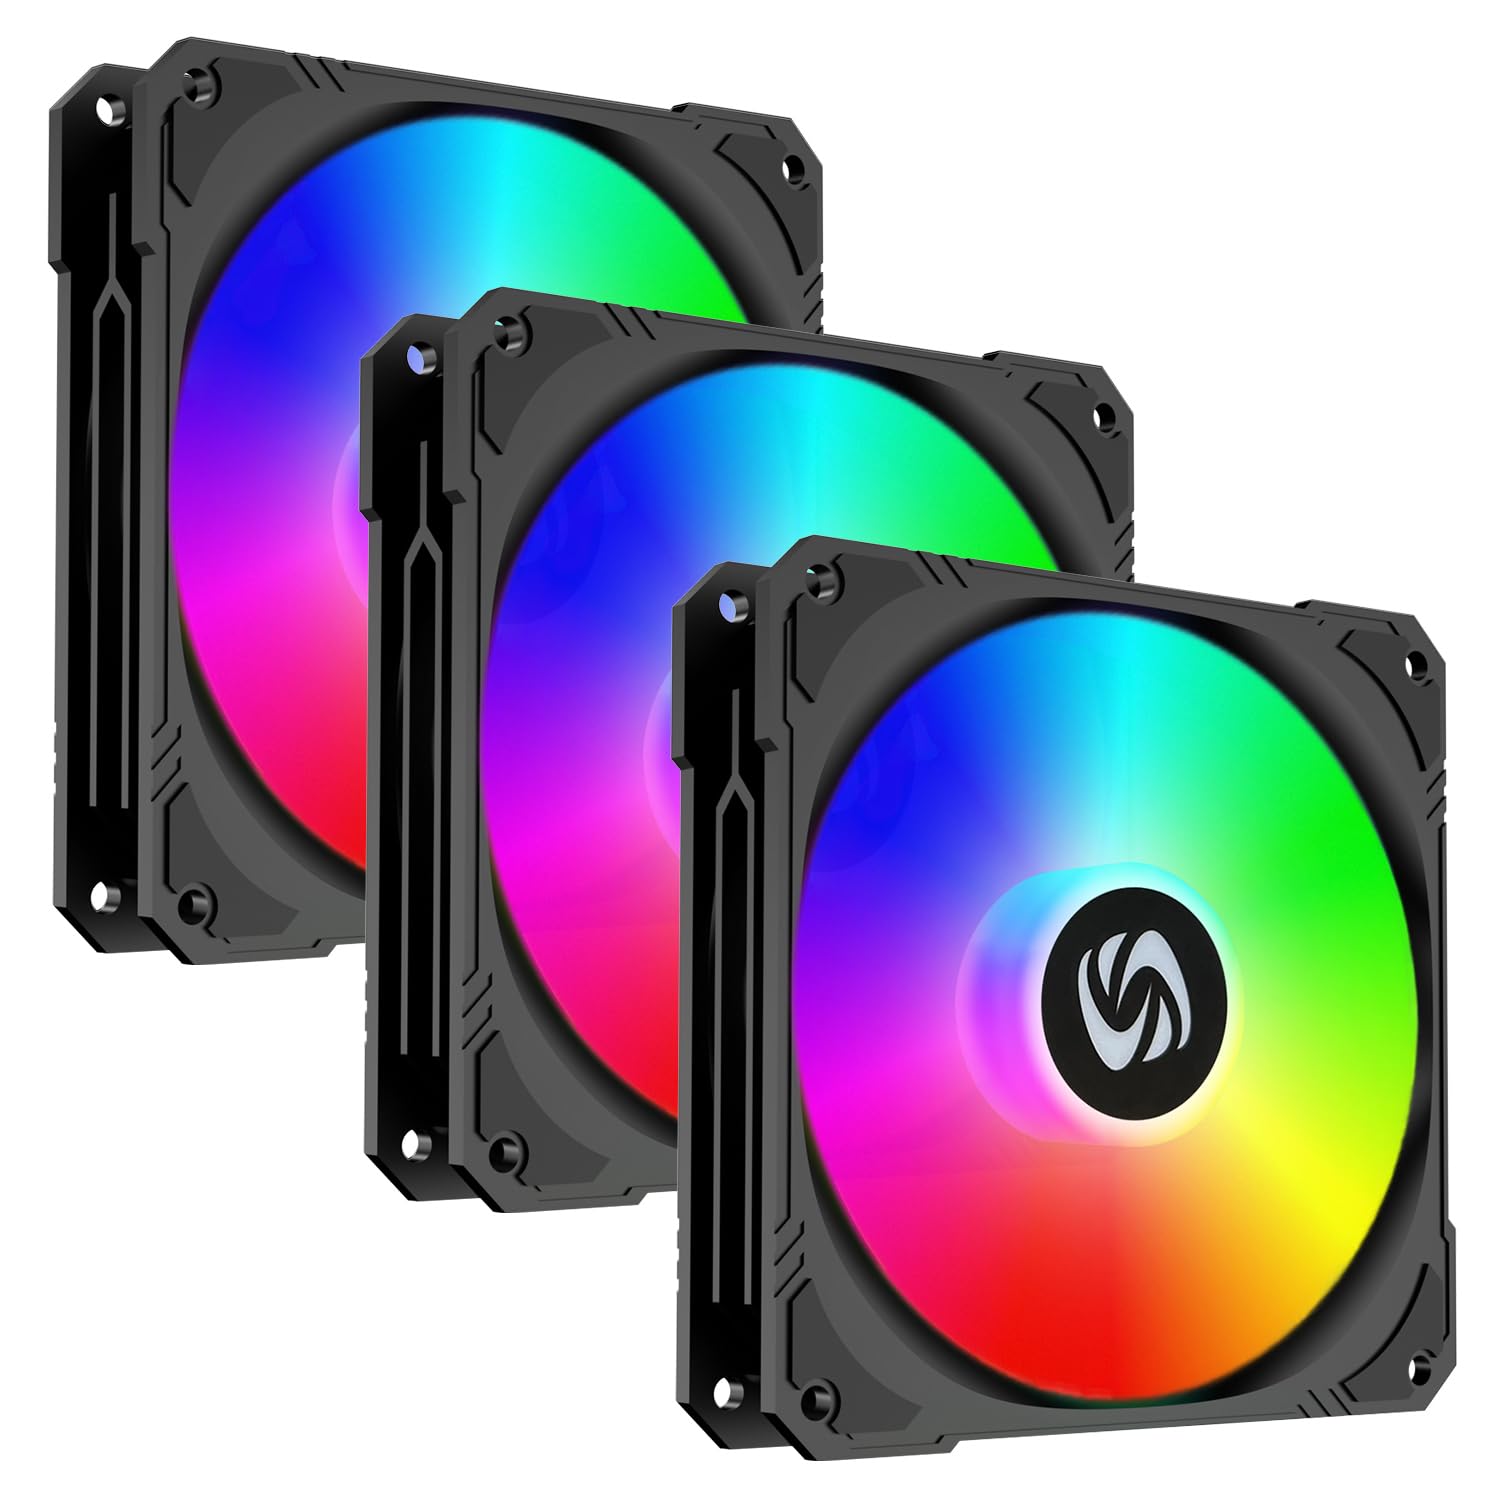 120mm Case Fan 3 Pack RGB Case Fans, Silent Version High Airflow PC Fans, Hydraulic Bearing - Low Noise RGB Fans with 12v 3 pin and molex 4 pin PSU Plug Computer Fans for PC Case